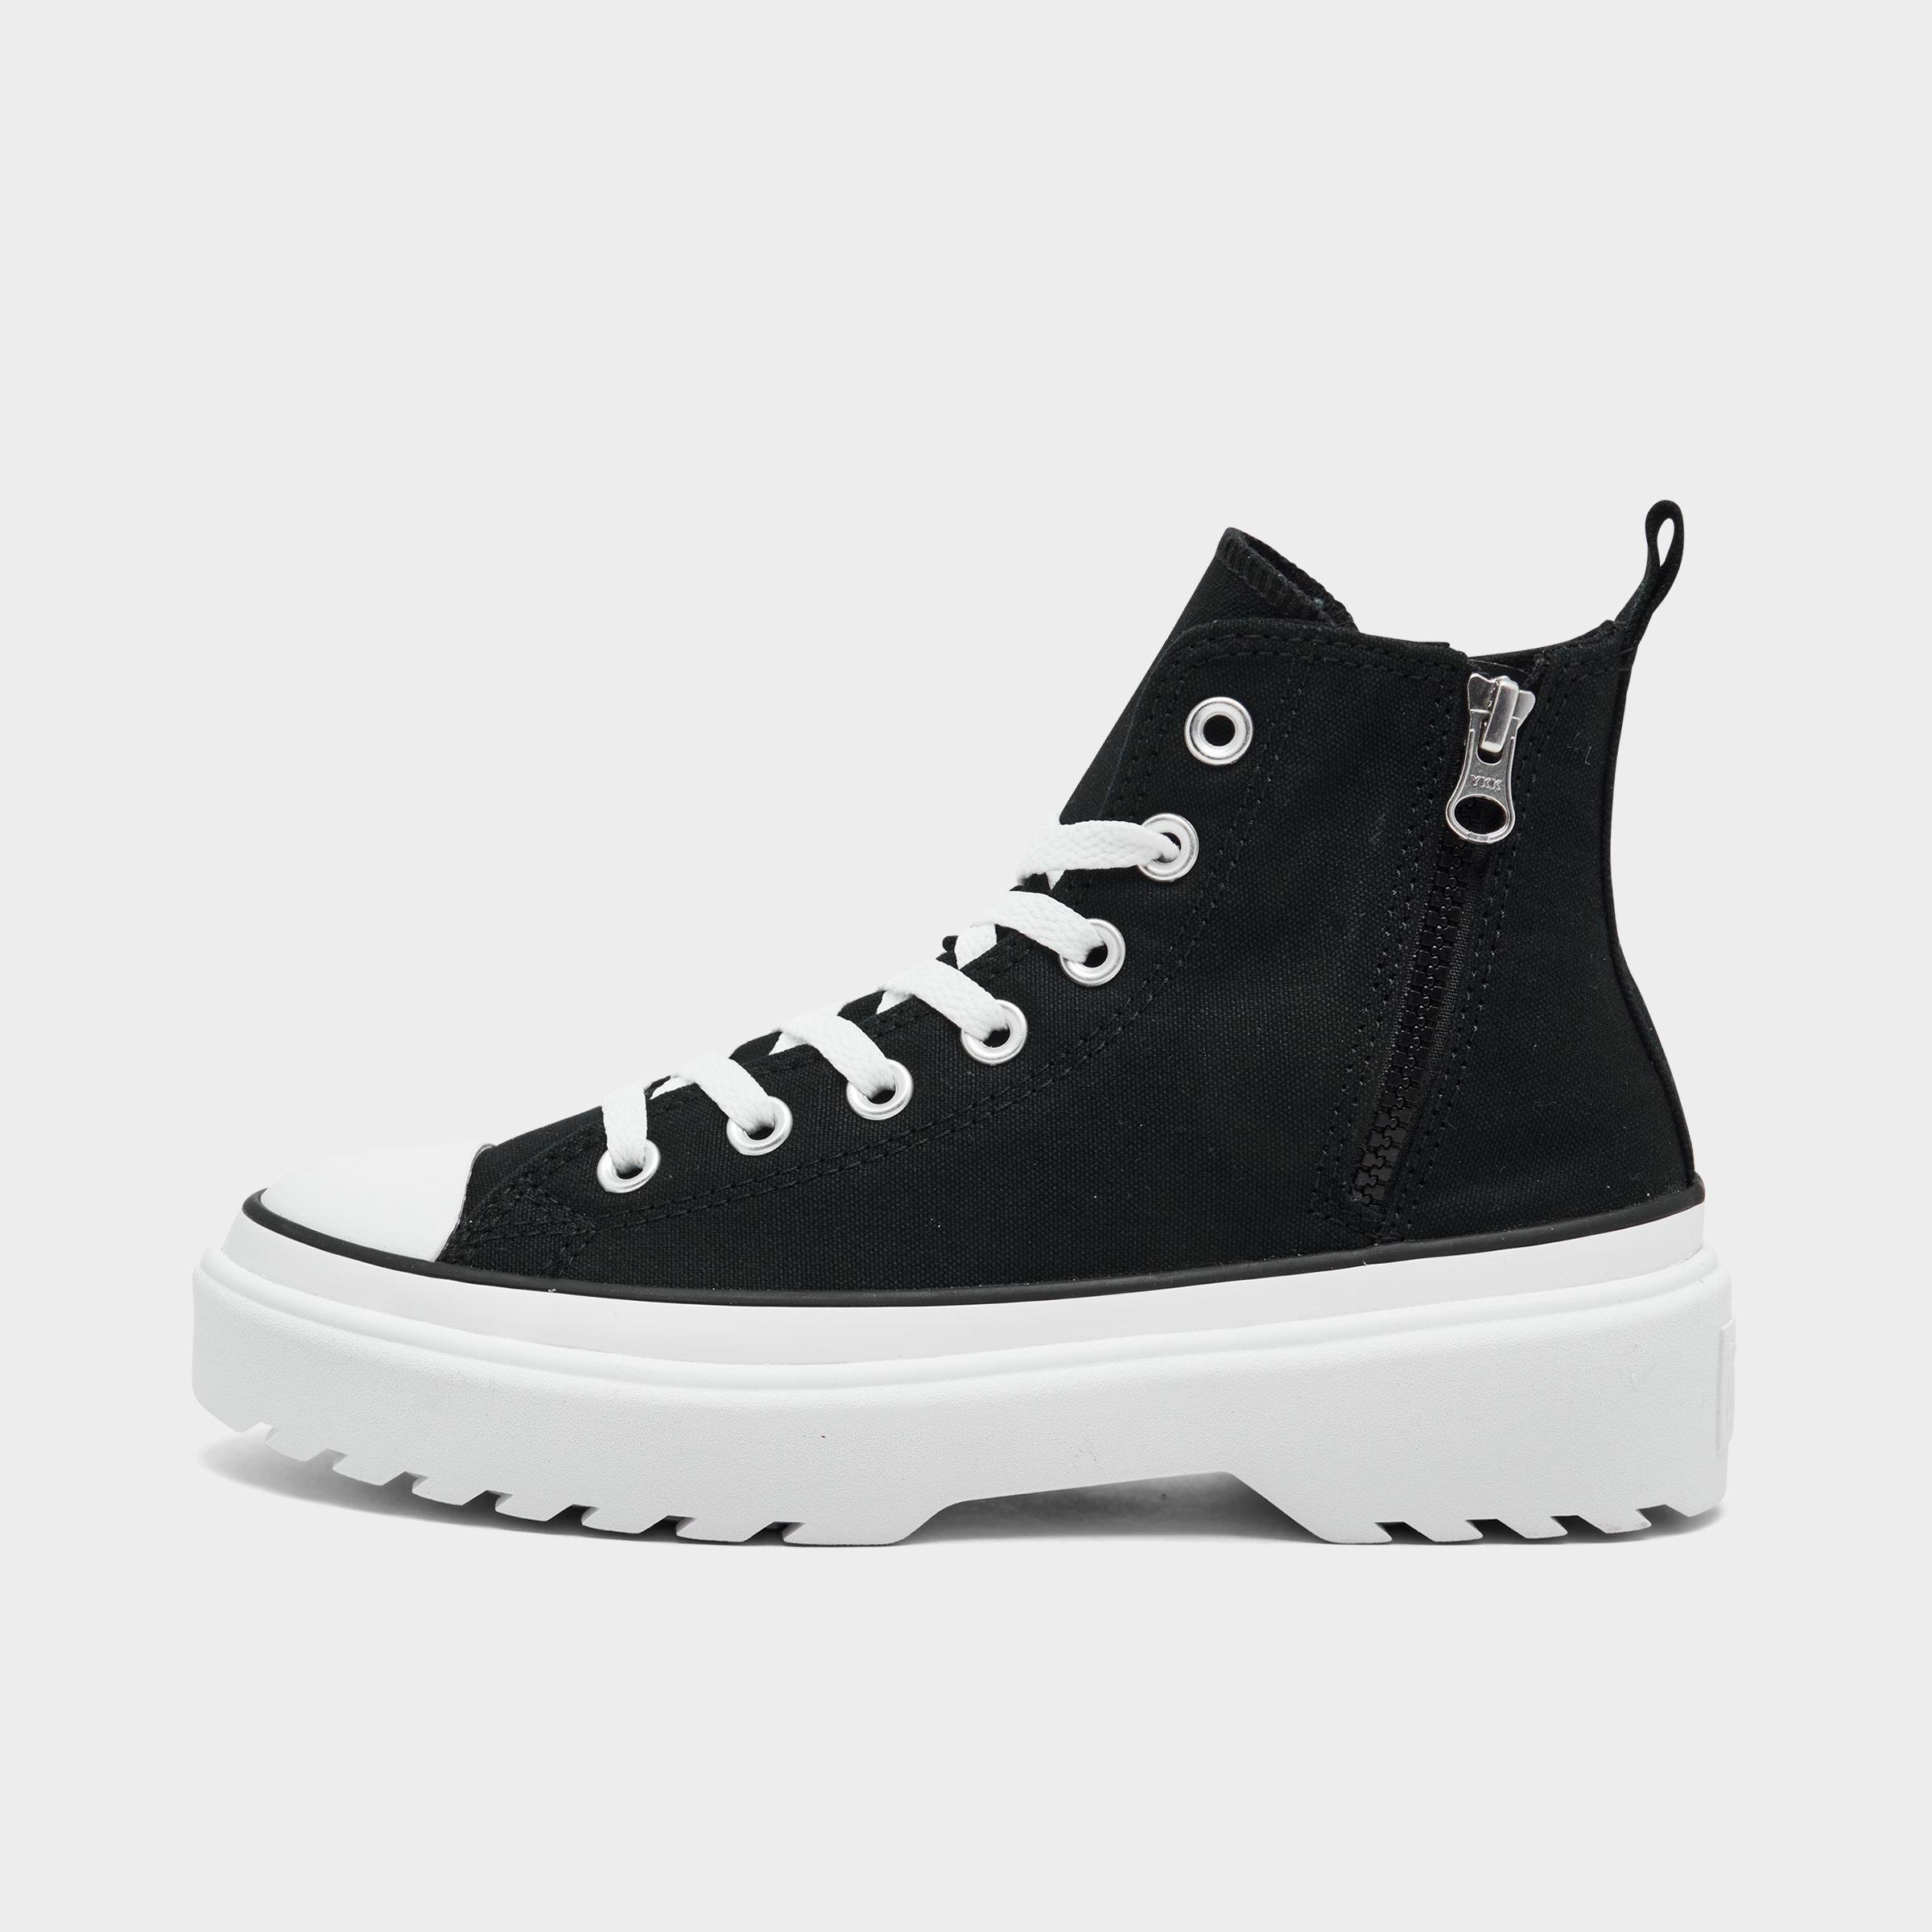 CONVERSE CONVERSE GIRLS' BIG KIDS CHUCK TAYLOR ALL STAR HIGH TOP LUGGED CASUAL SHOES